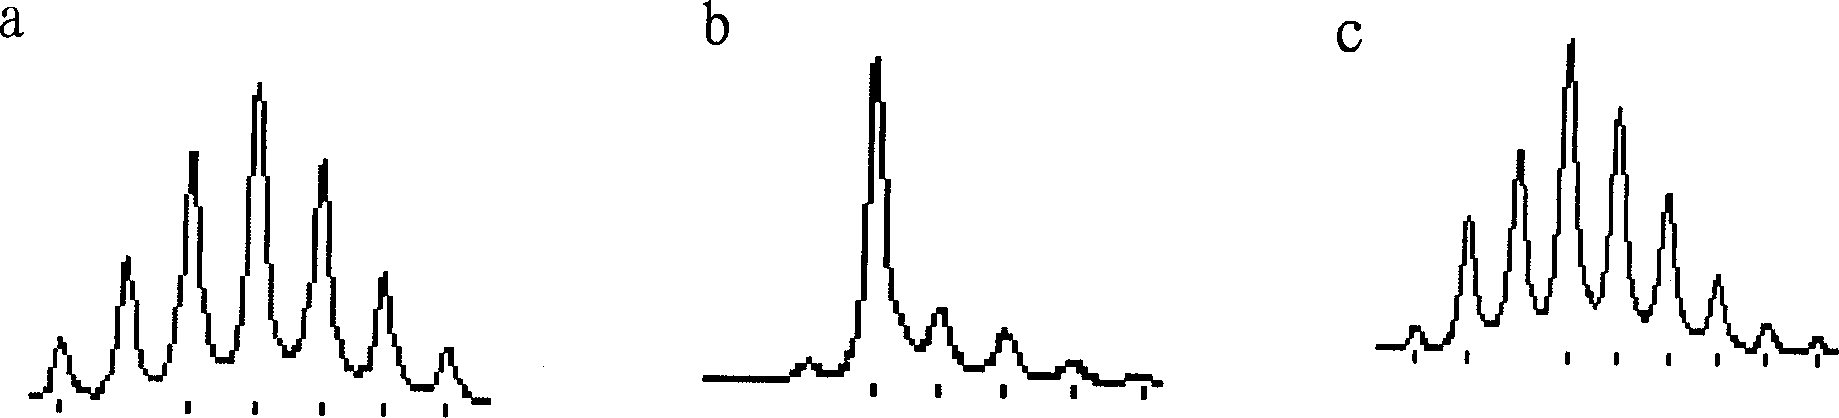 Method for evaluating curative effect of medication to cure HIV through detecting change of TCR gene of human T cell receptor before and after treatment